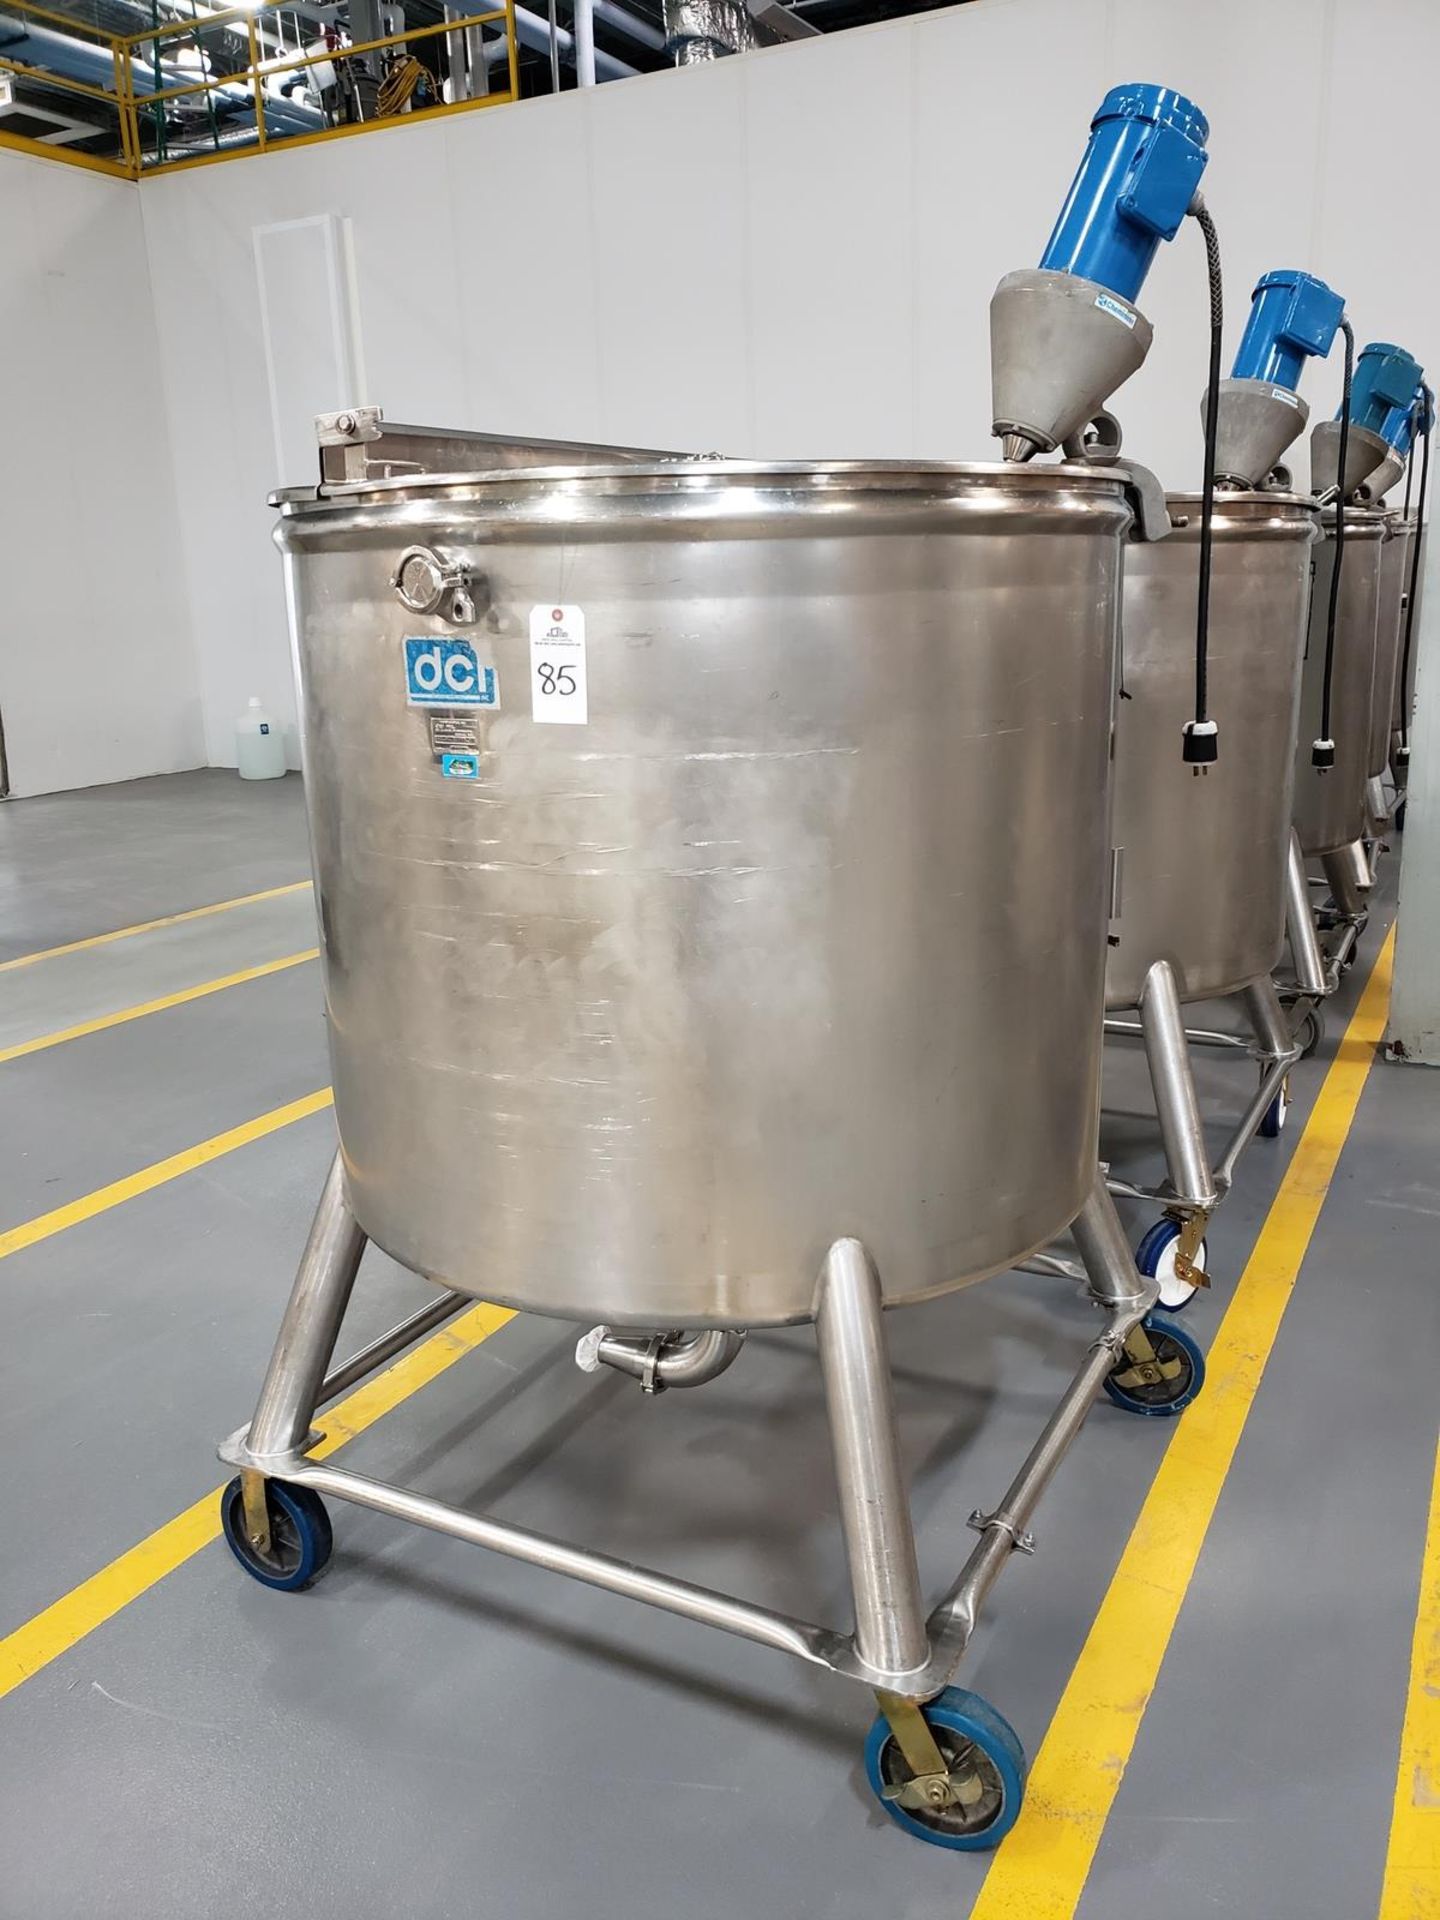 DCI 330 Gallon Stainless Steel Portable Mixing Tank | Rig Fee $175